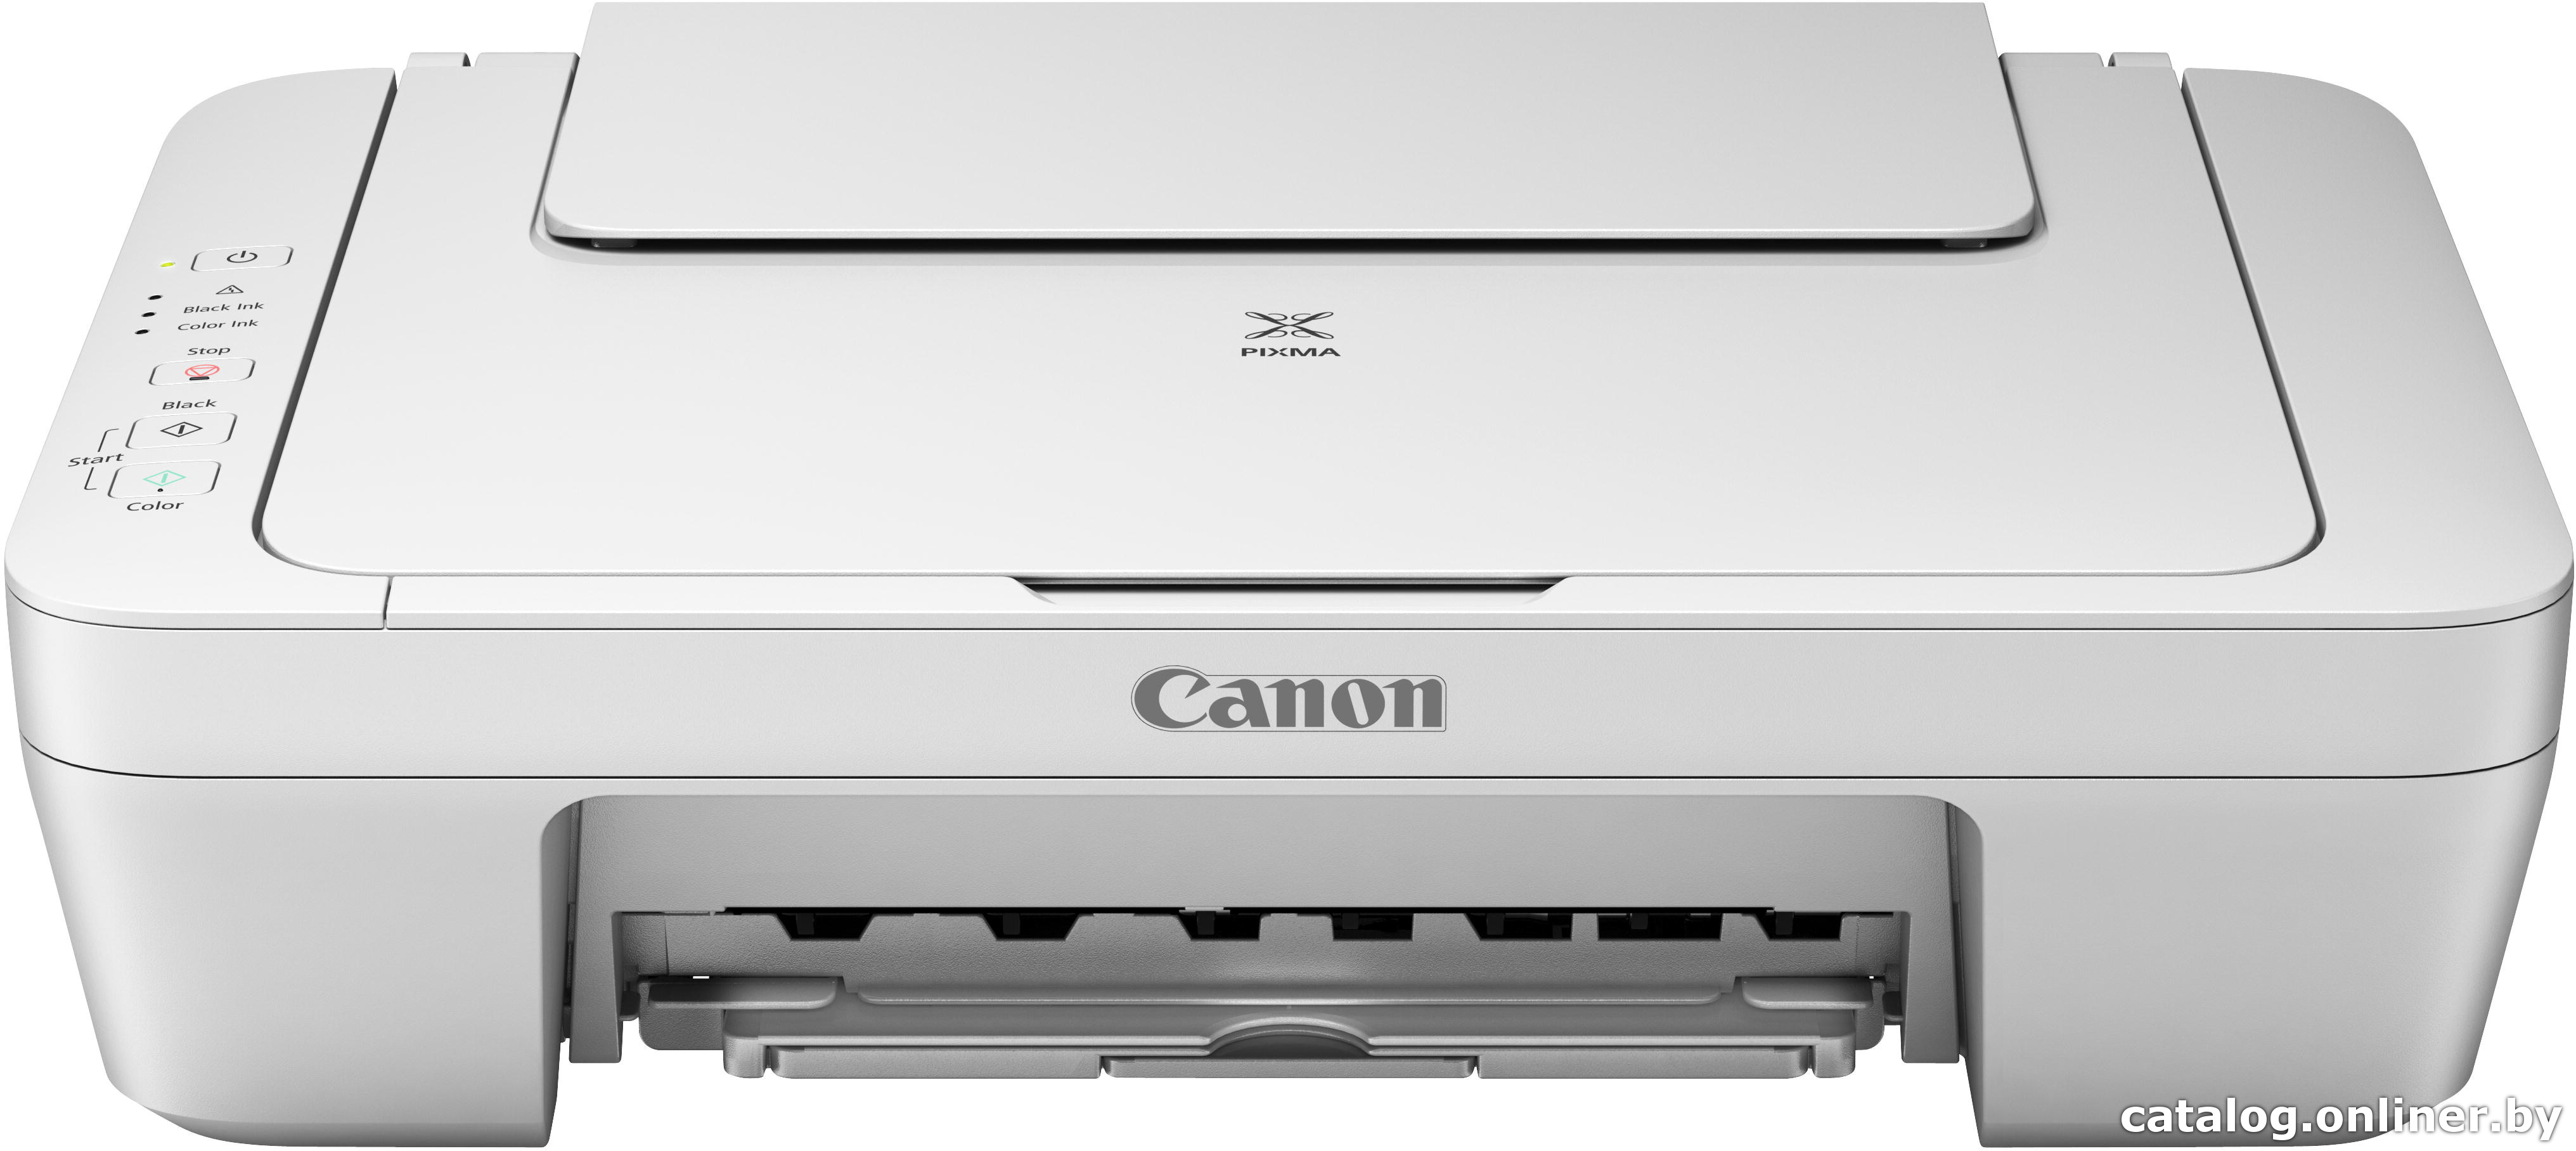 Canon MG2450 Driver Mac High Sierra How-to Download and Install - Featured